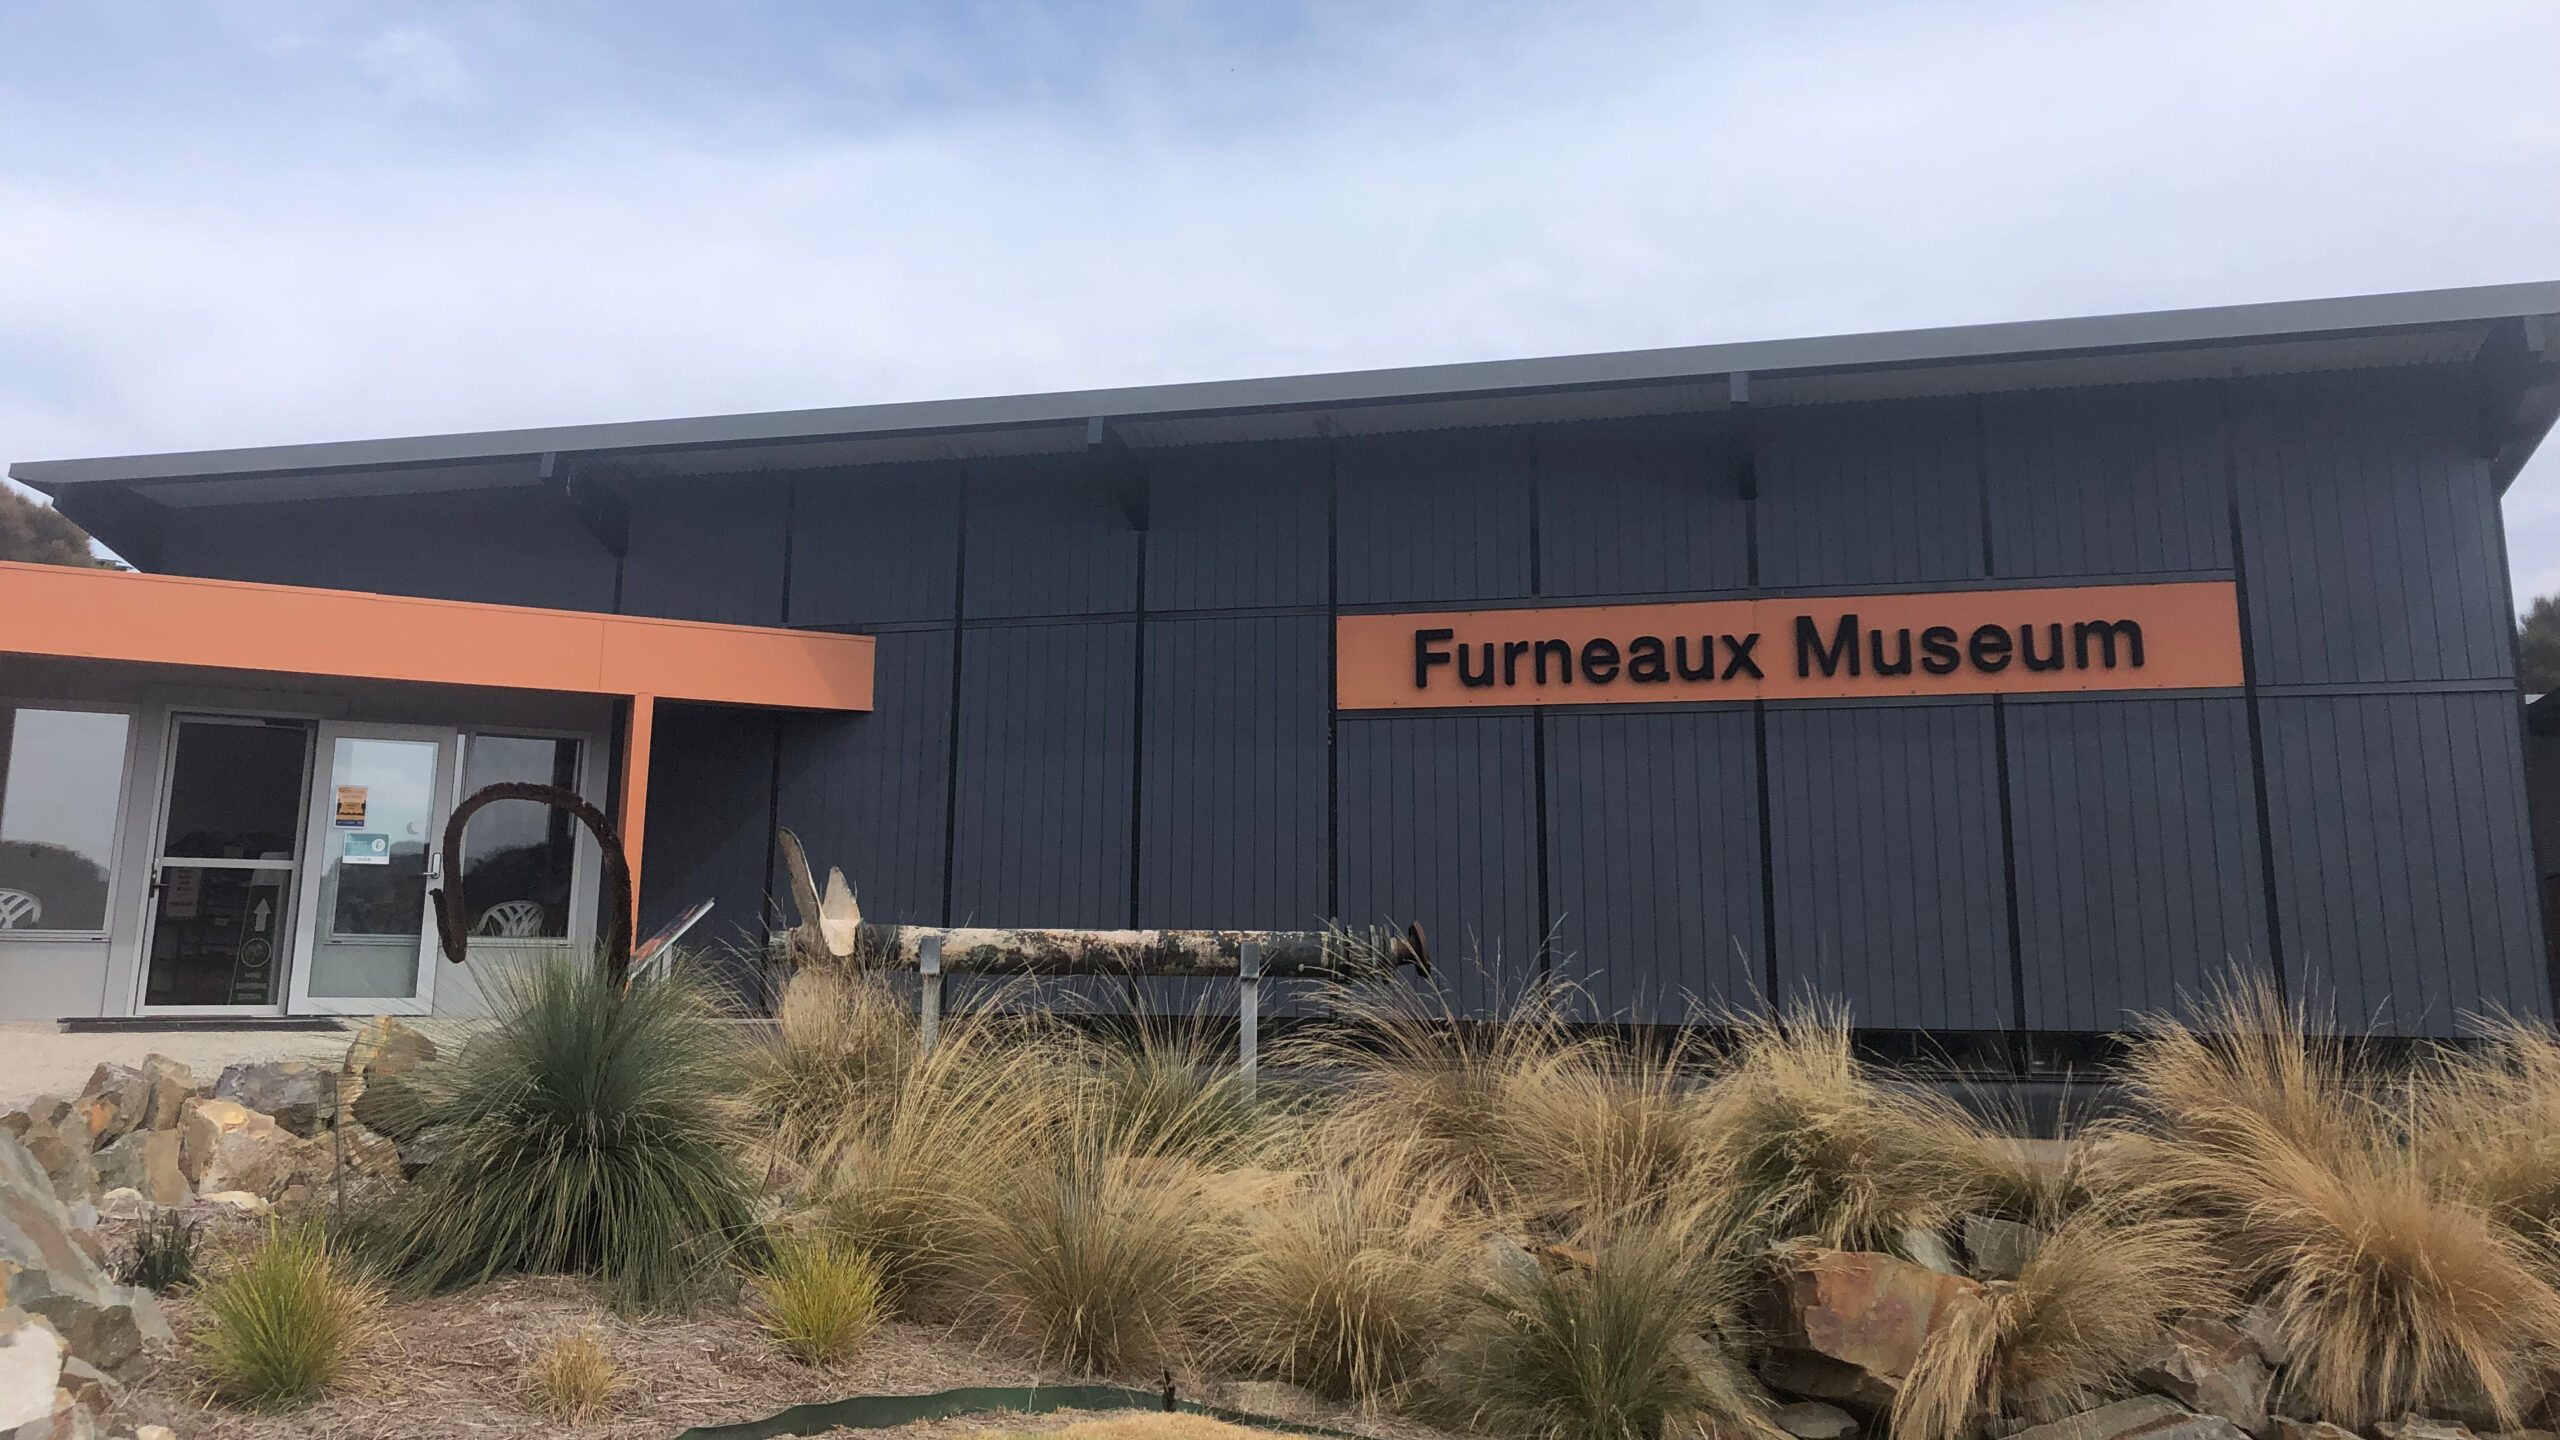 The Furneaux Museum from the outside